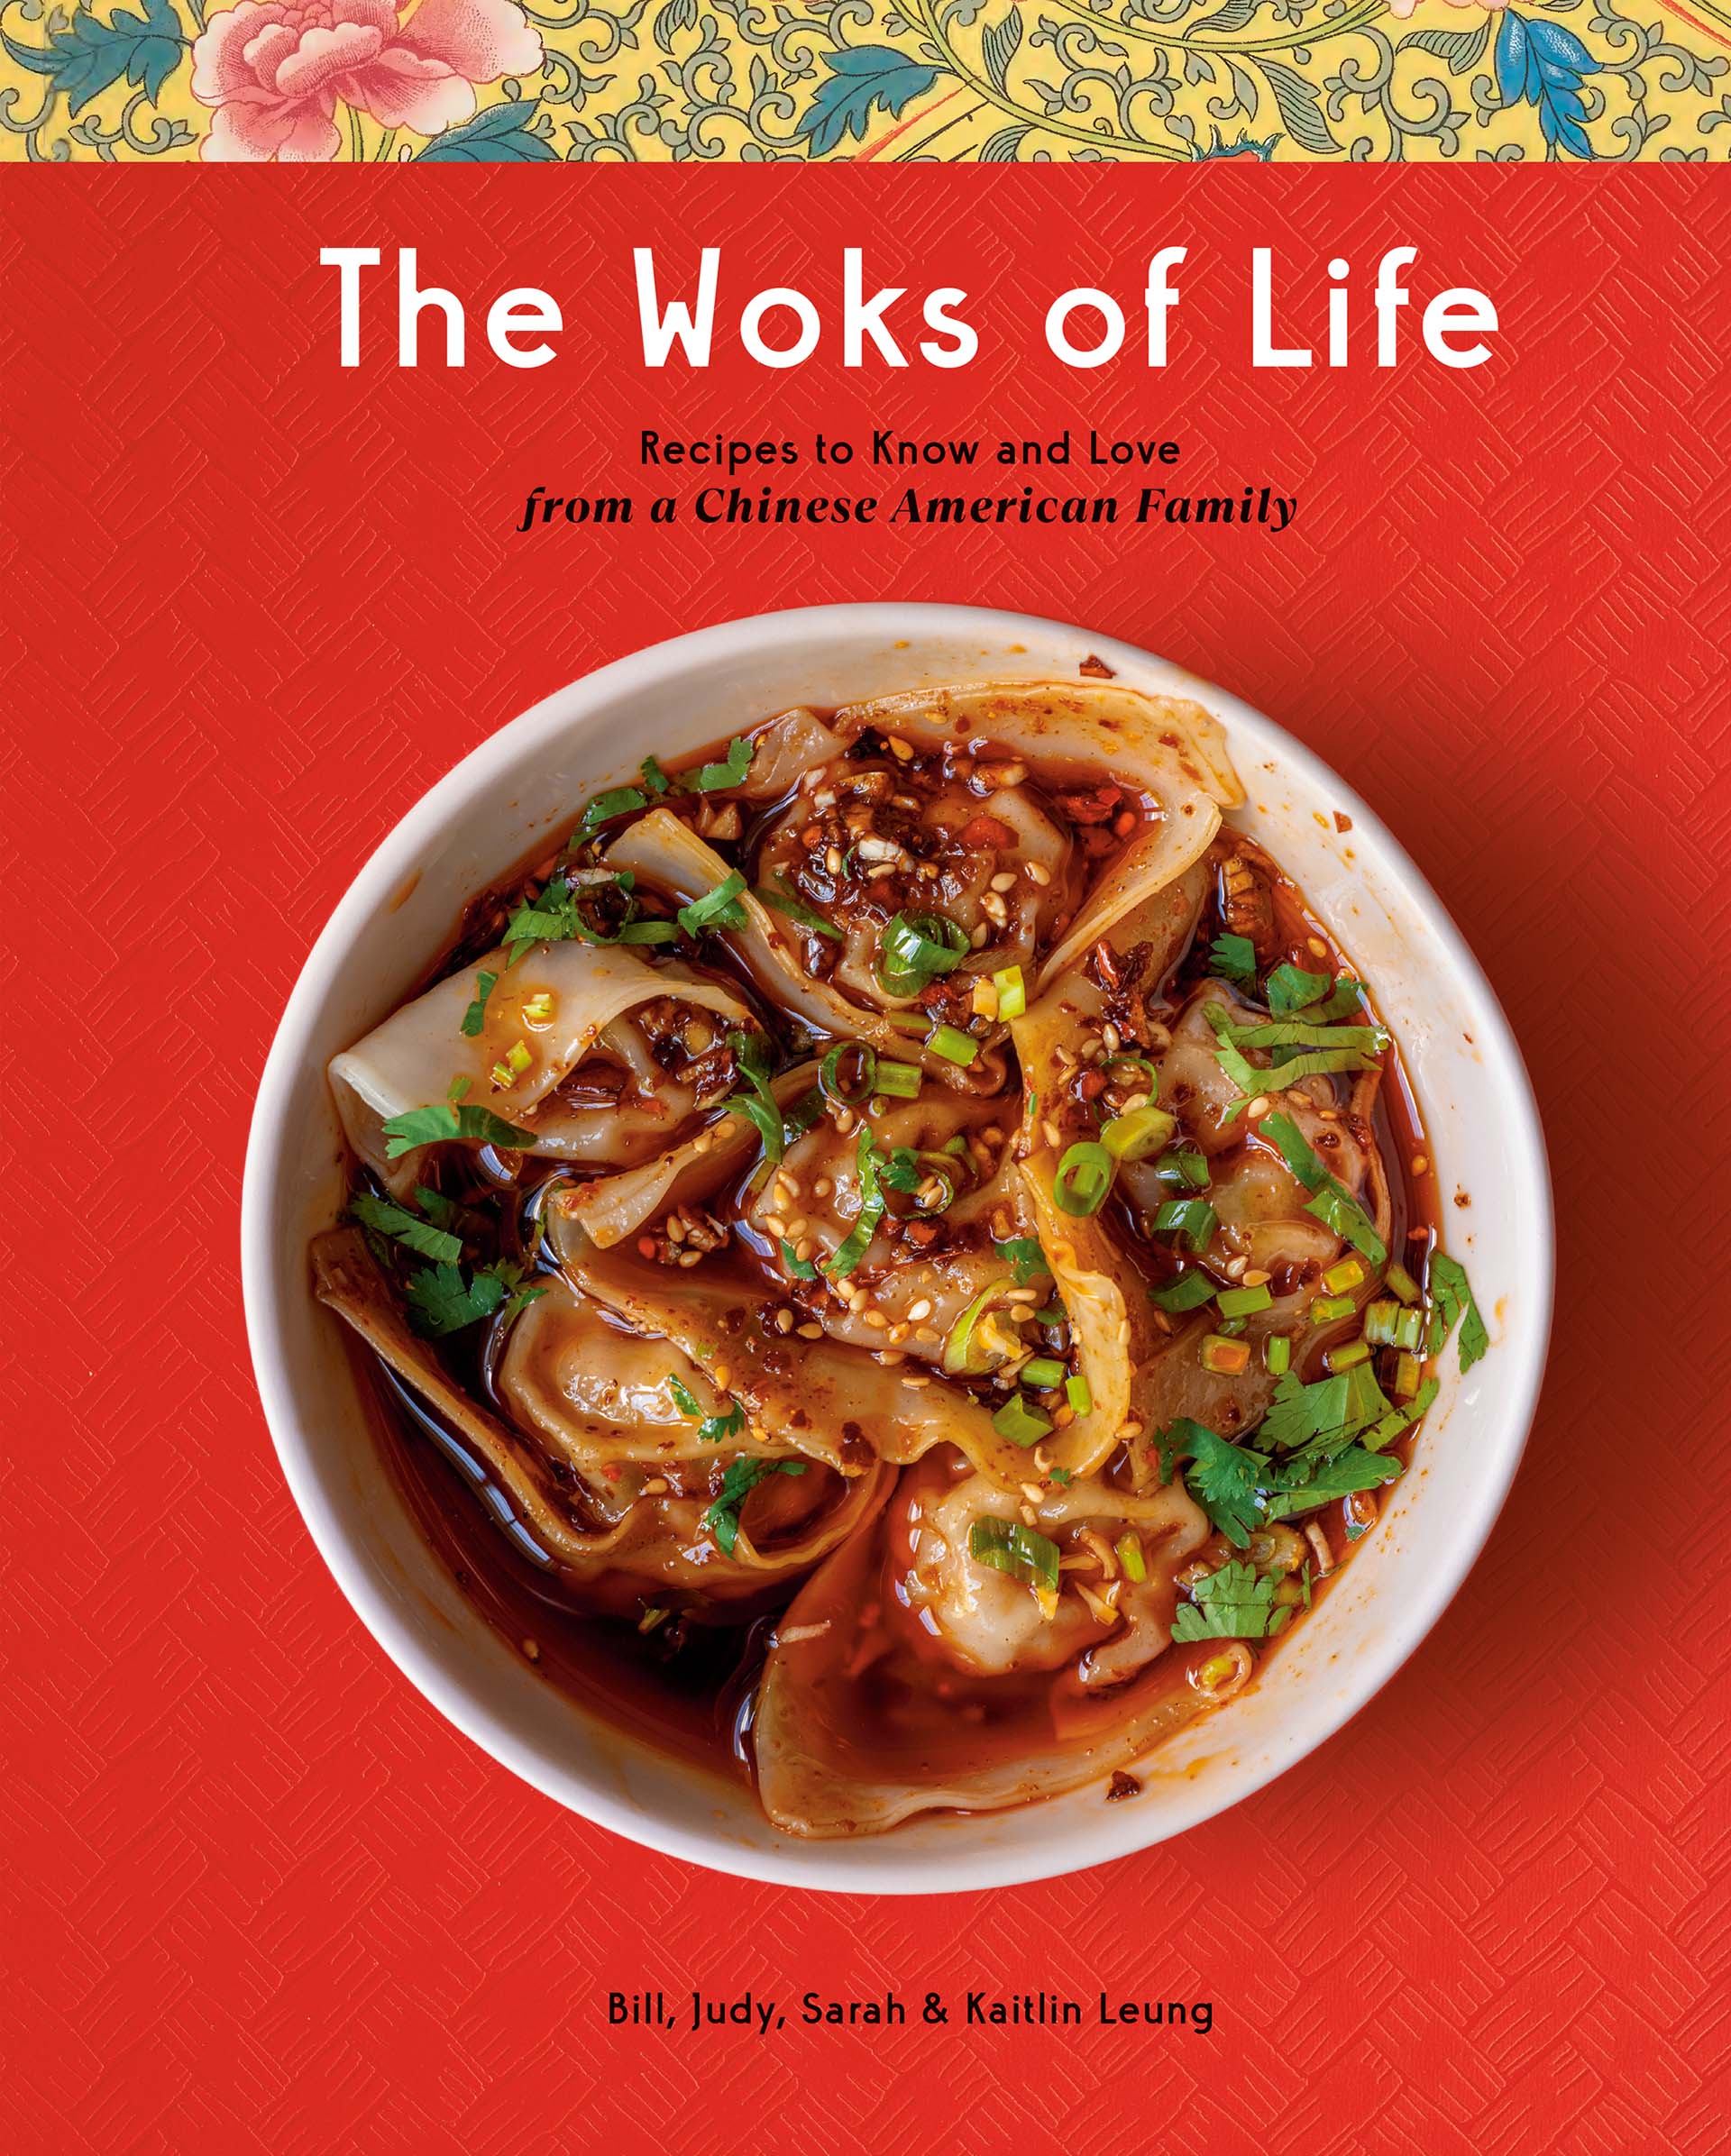 Cover of The Woks of Life cookbook shows a bowl of spicy wontons against a red backdrop.